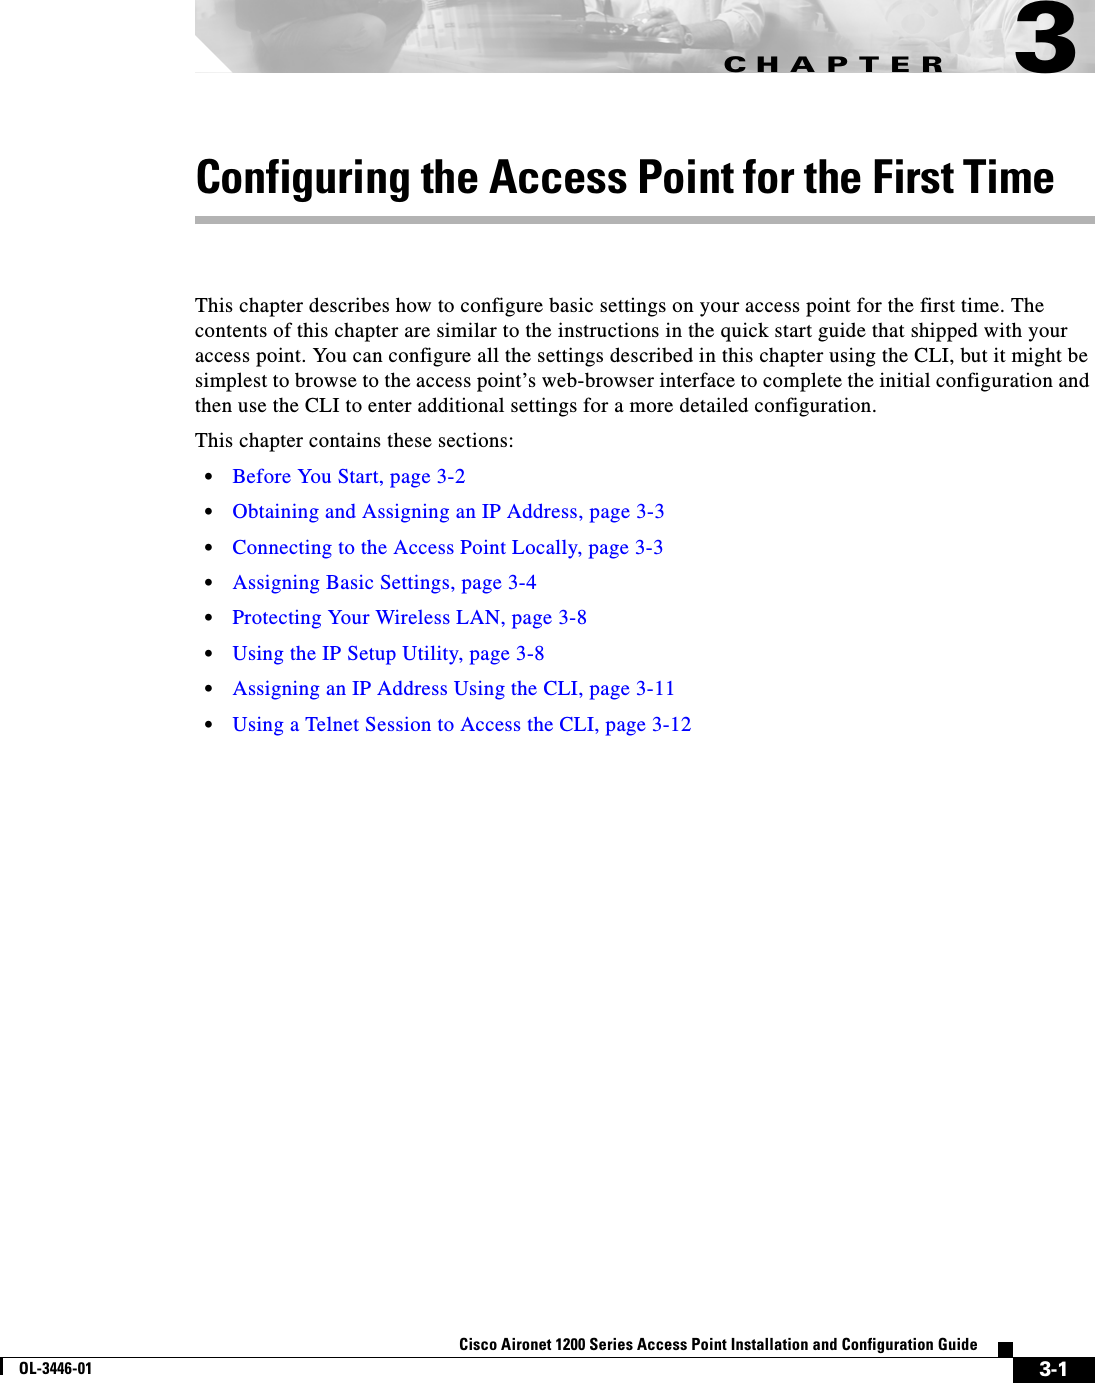 CHAPTER3-1Cisco Aironet 1200 Series Access Point Installation and Configuration GuideOL-3446-013Configuring the Access Point for the First TimeThis chapter describes how to configure basic settings on your access point for the first time. The contents of this chapter are similar to the instructions in the quick start guide that shipped with your access point. You can configure all the settings described in this chapter using the CLI, but it might be simplest to browse to the access point’s web-browser interface to complete the initial configuration and then use the CLI to enter additional settings for a more detailed configuration. This chapter contains these sections:•Before You Start, page 3-2•Obtaining and Assigning an IP Address, page 3-3•Connecting to the Access Point Locally, page 3-3•Assigning Basic Settings, page 3-4•Protecting Your Wireless LAN, page 3-8•Using the IP Setup Utility, page 3-8•Assigning an IP Address Using the CLI, page 3-11•Using a Telnet Session to Access the CLI, page 3-12